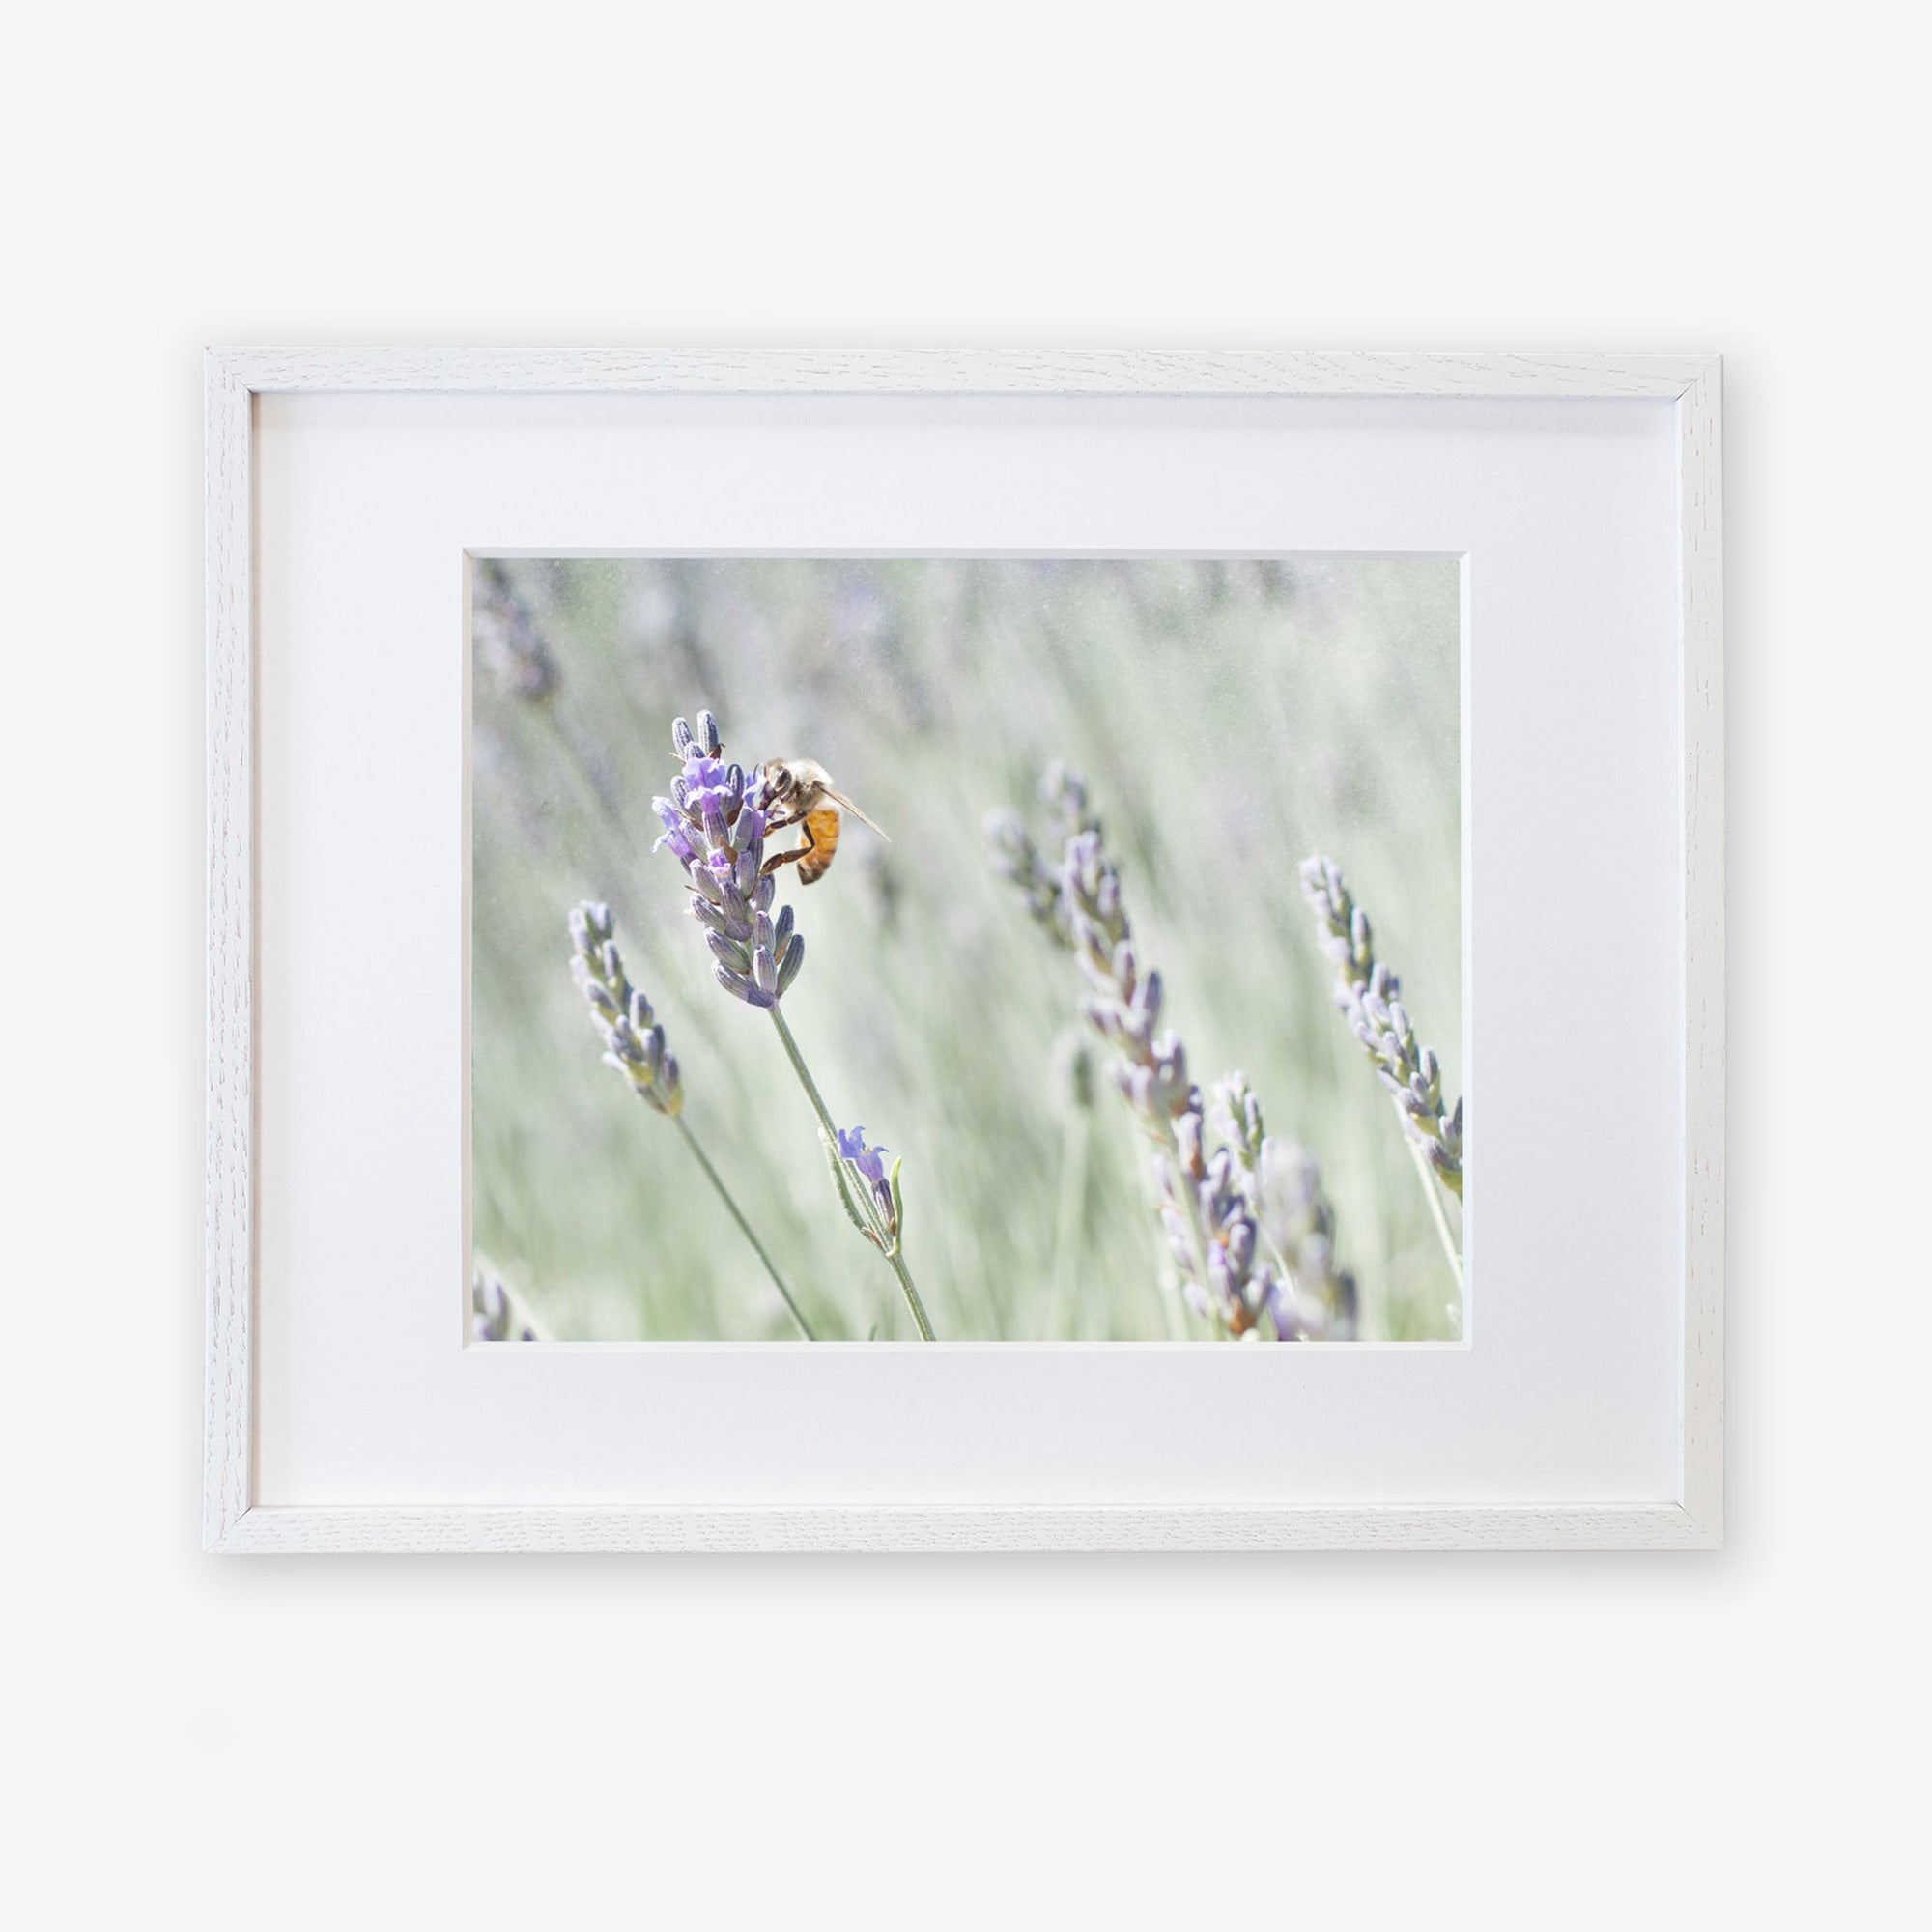 A framed photograph displaying a close-up view of a bee perched on lavender flowers at a lavender farm with a soft, blurred background - Offley Green&#39;s Rustic Floral Print, &#39;Lavender for Bees.&#39;